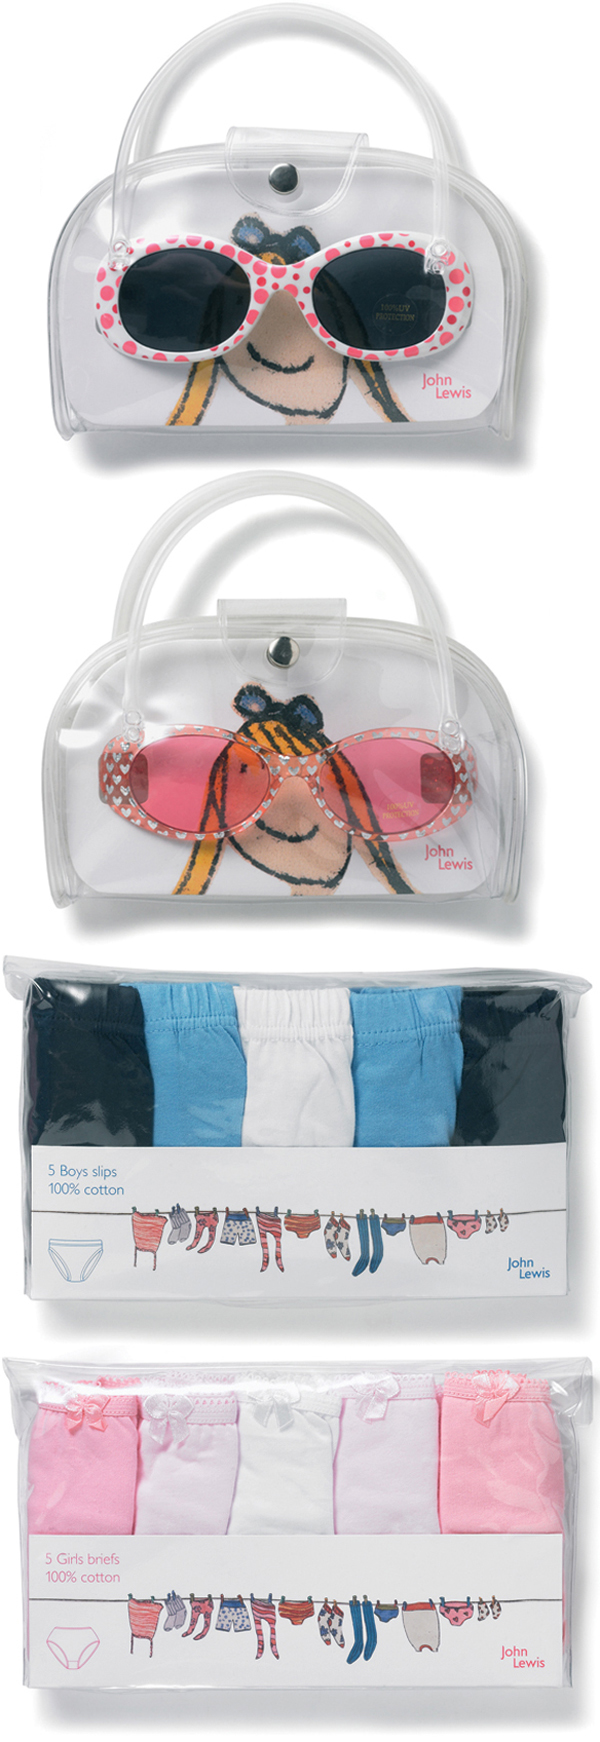 John Lewis Childrenswear illustrations products high street